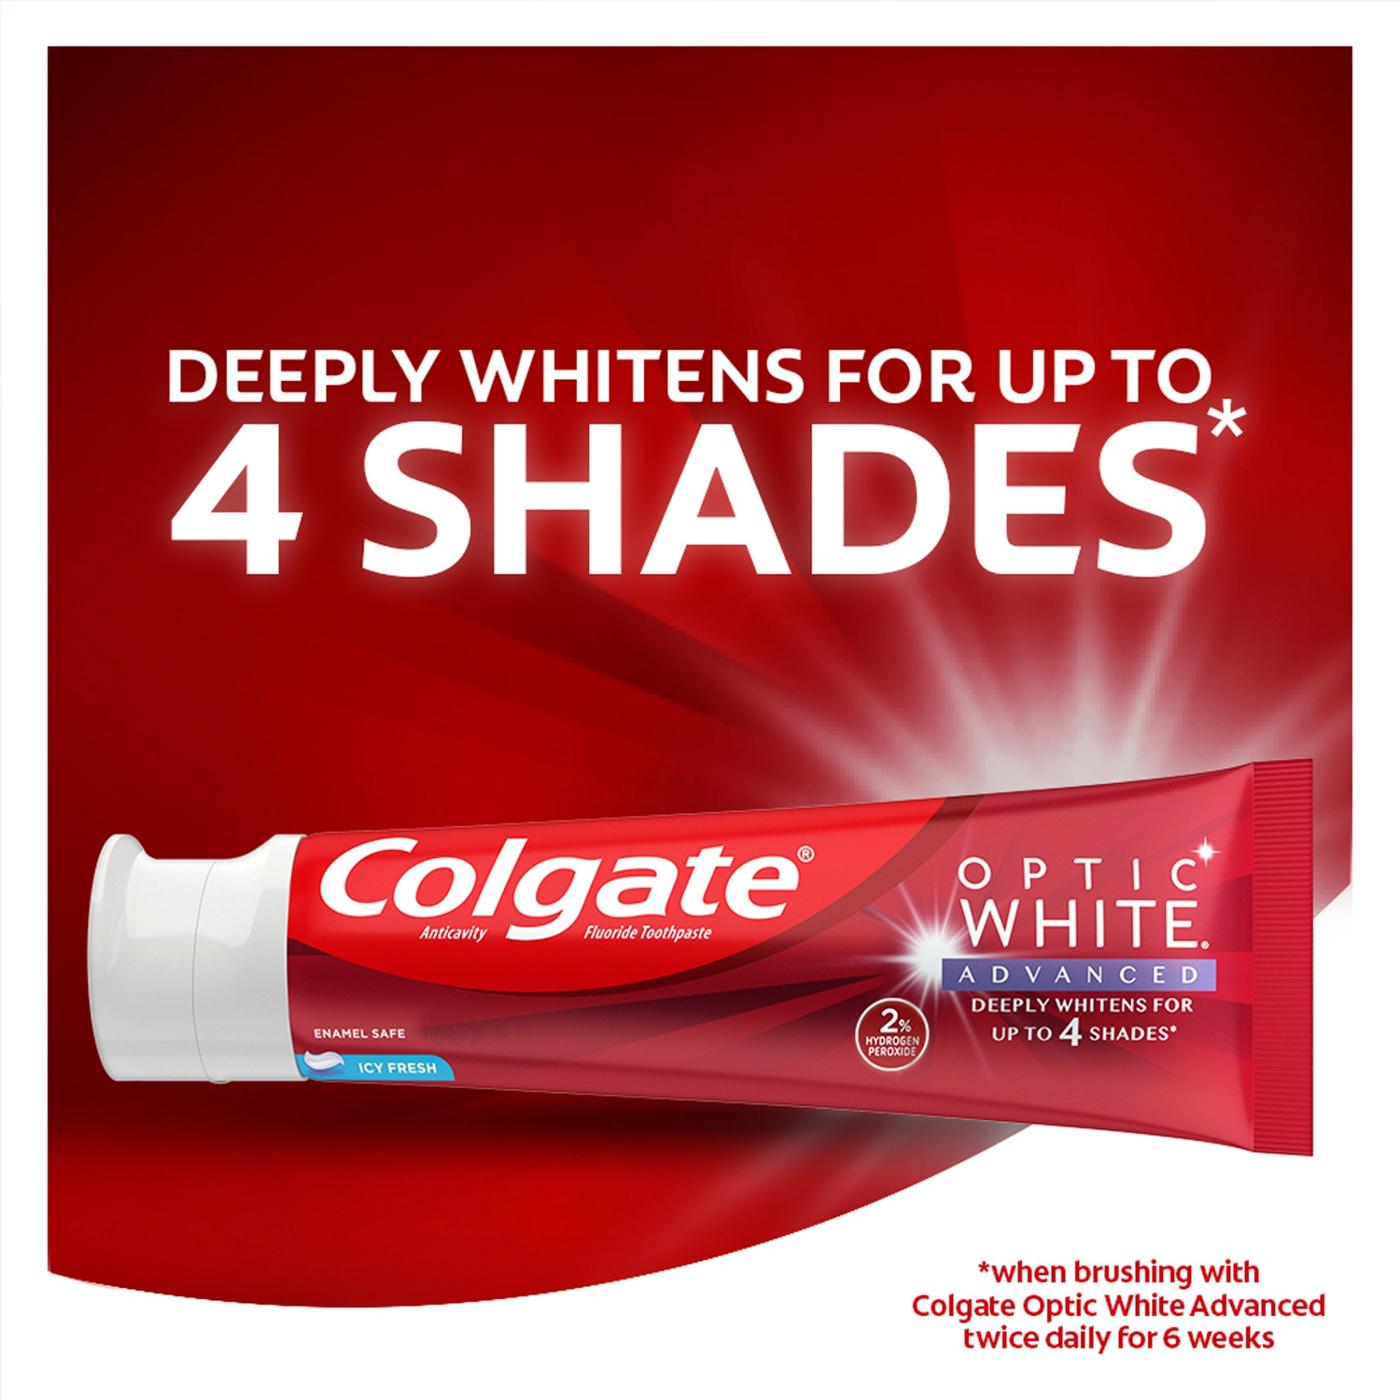 Colgate Optic White Advanced Anticavity Toothpaste - Icy Fresh; image 6 of 8